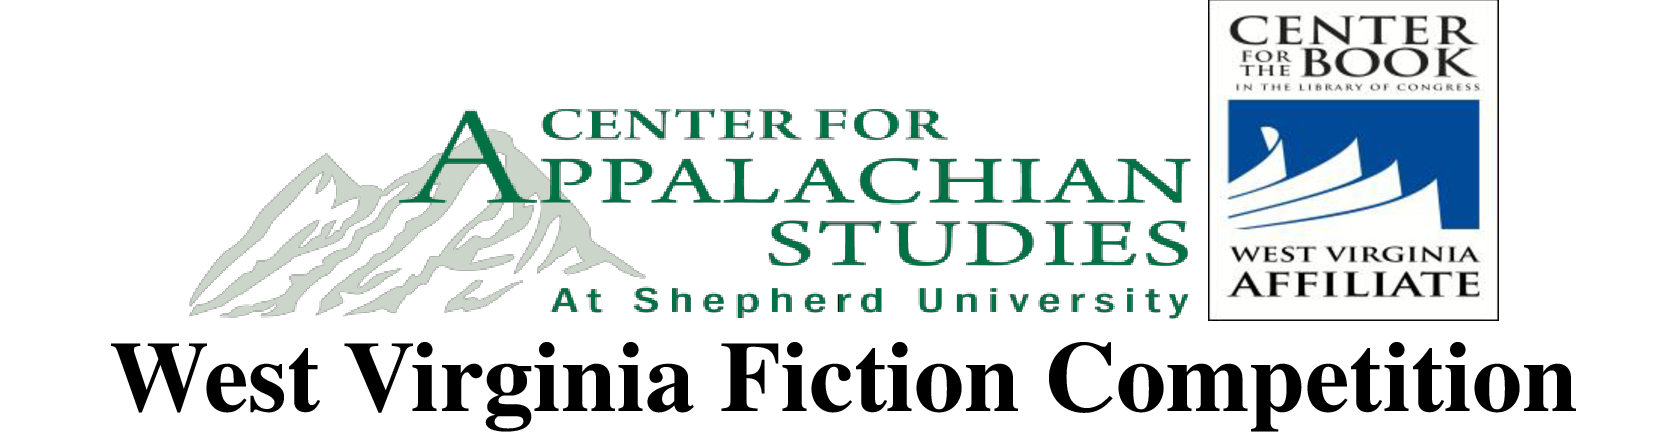 West Virginia Fiction Competition